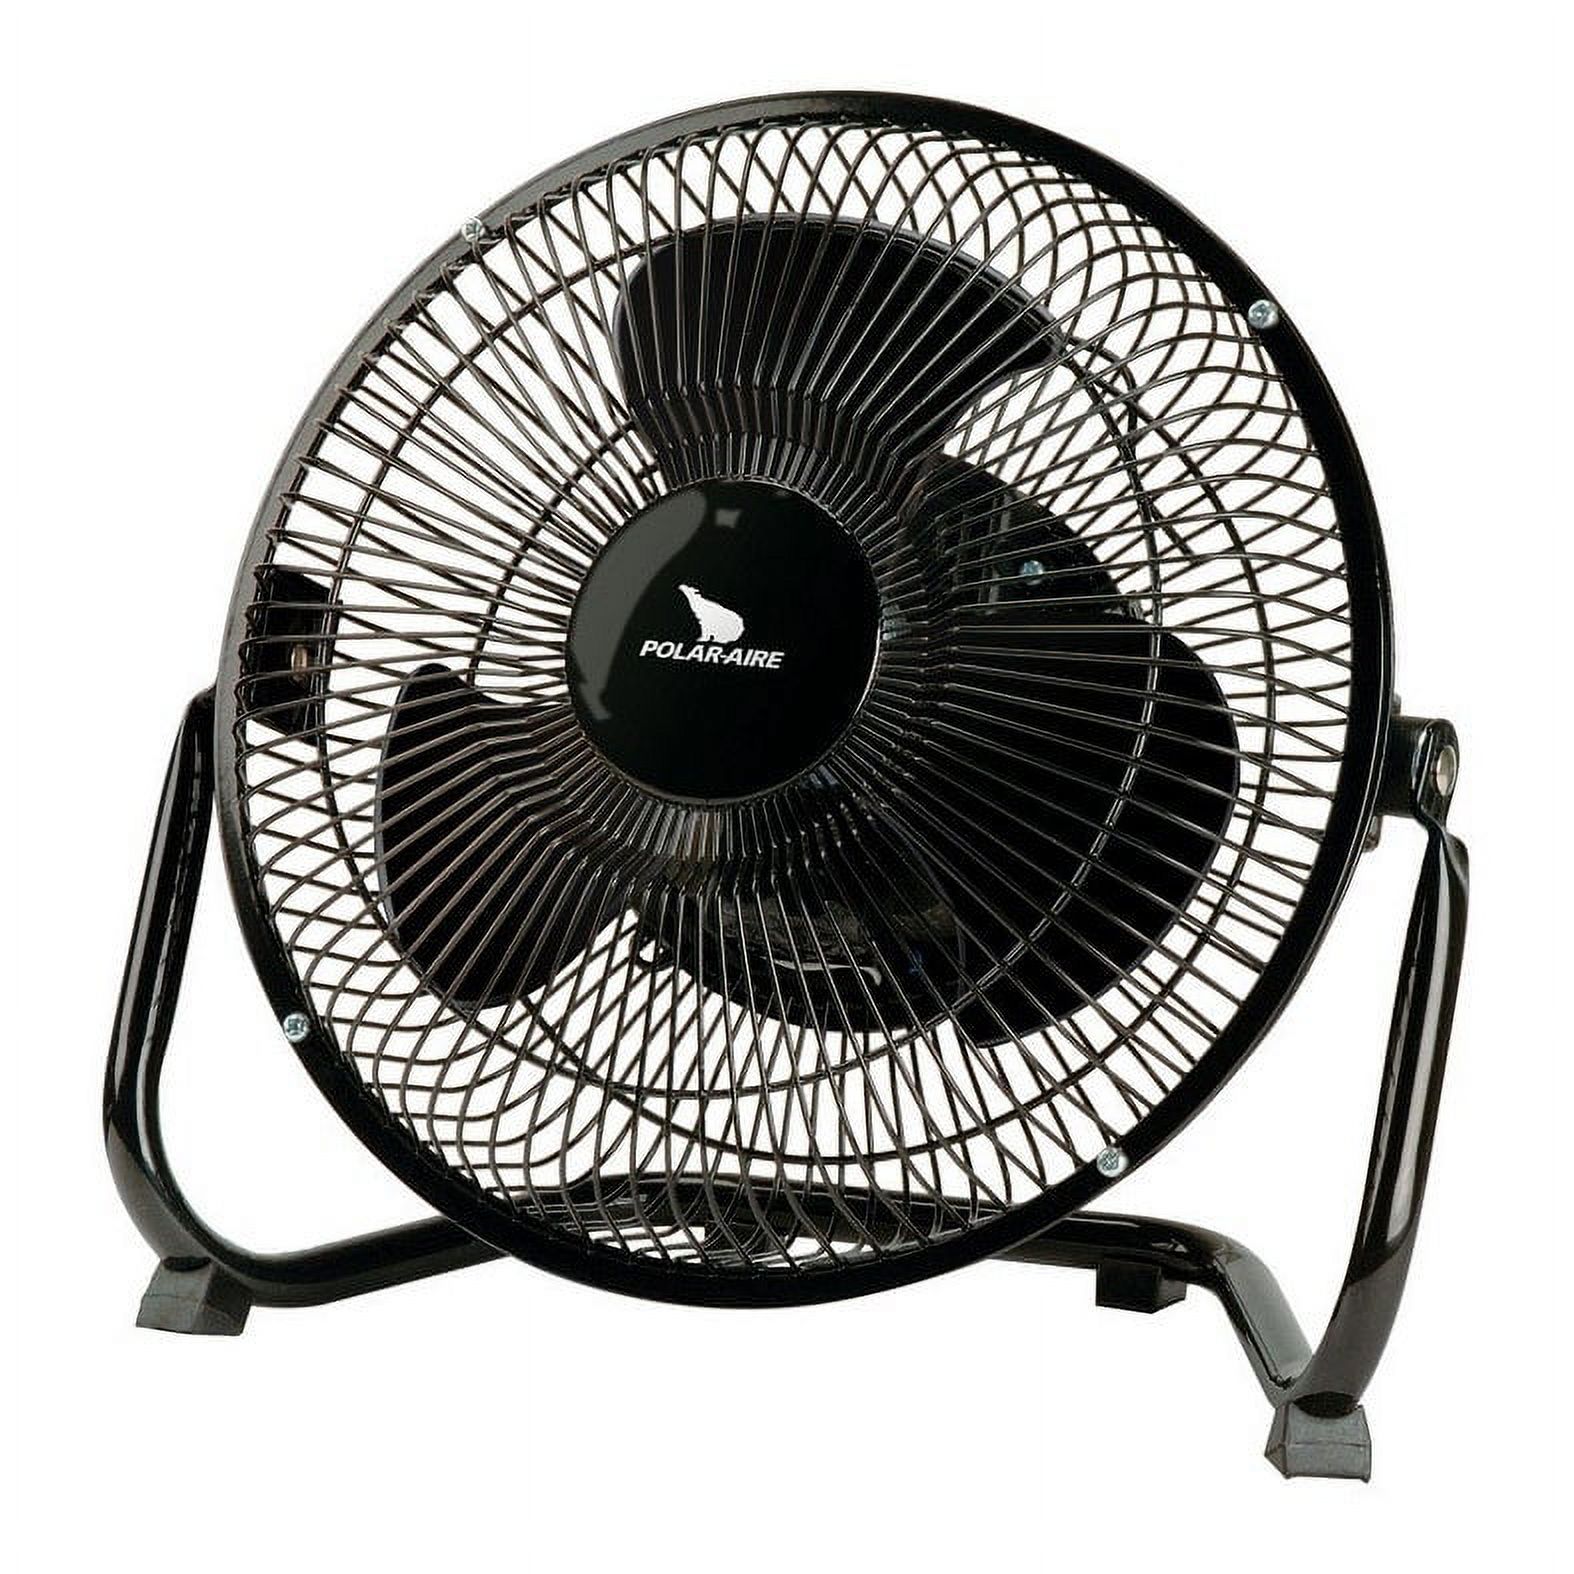 Polar-Aire Fans 8" 3 Speed Table Fans With VF-8PB, Black - image 2 of 2